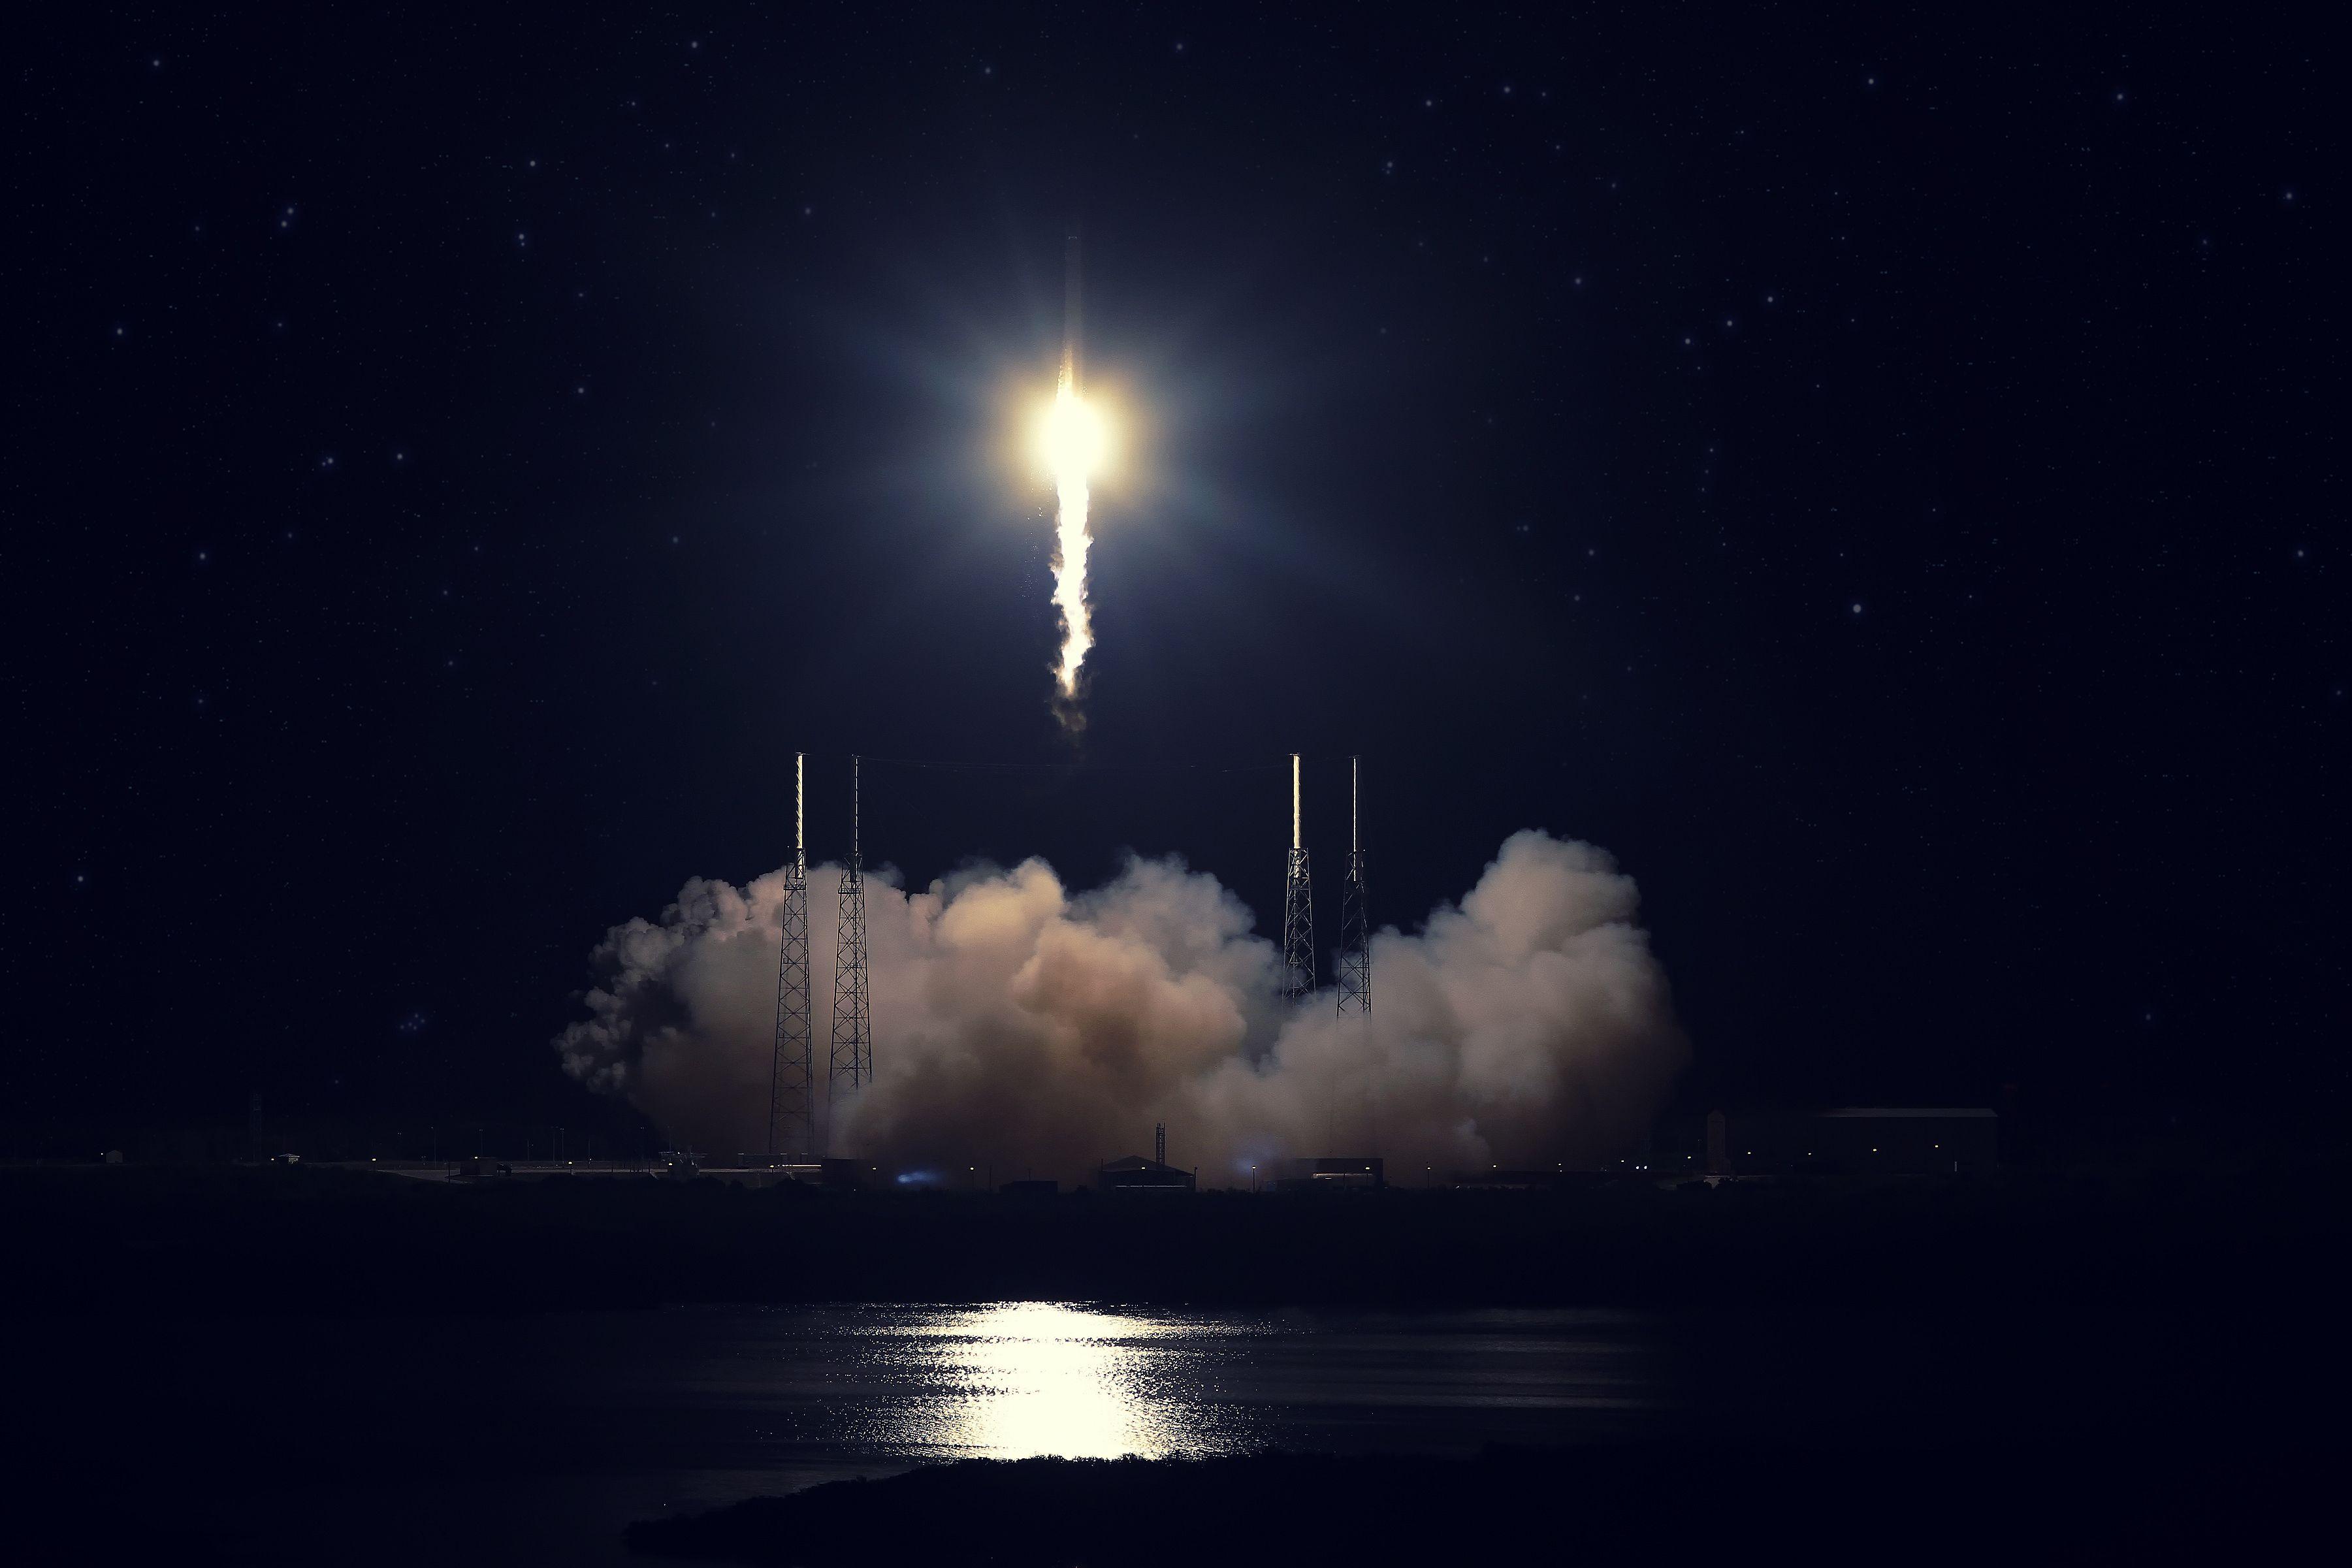 Download SpaceX Wallpaper Background 59812 3601x2401 px High